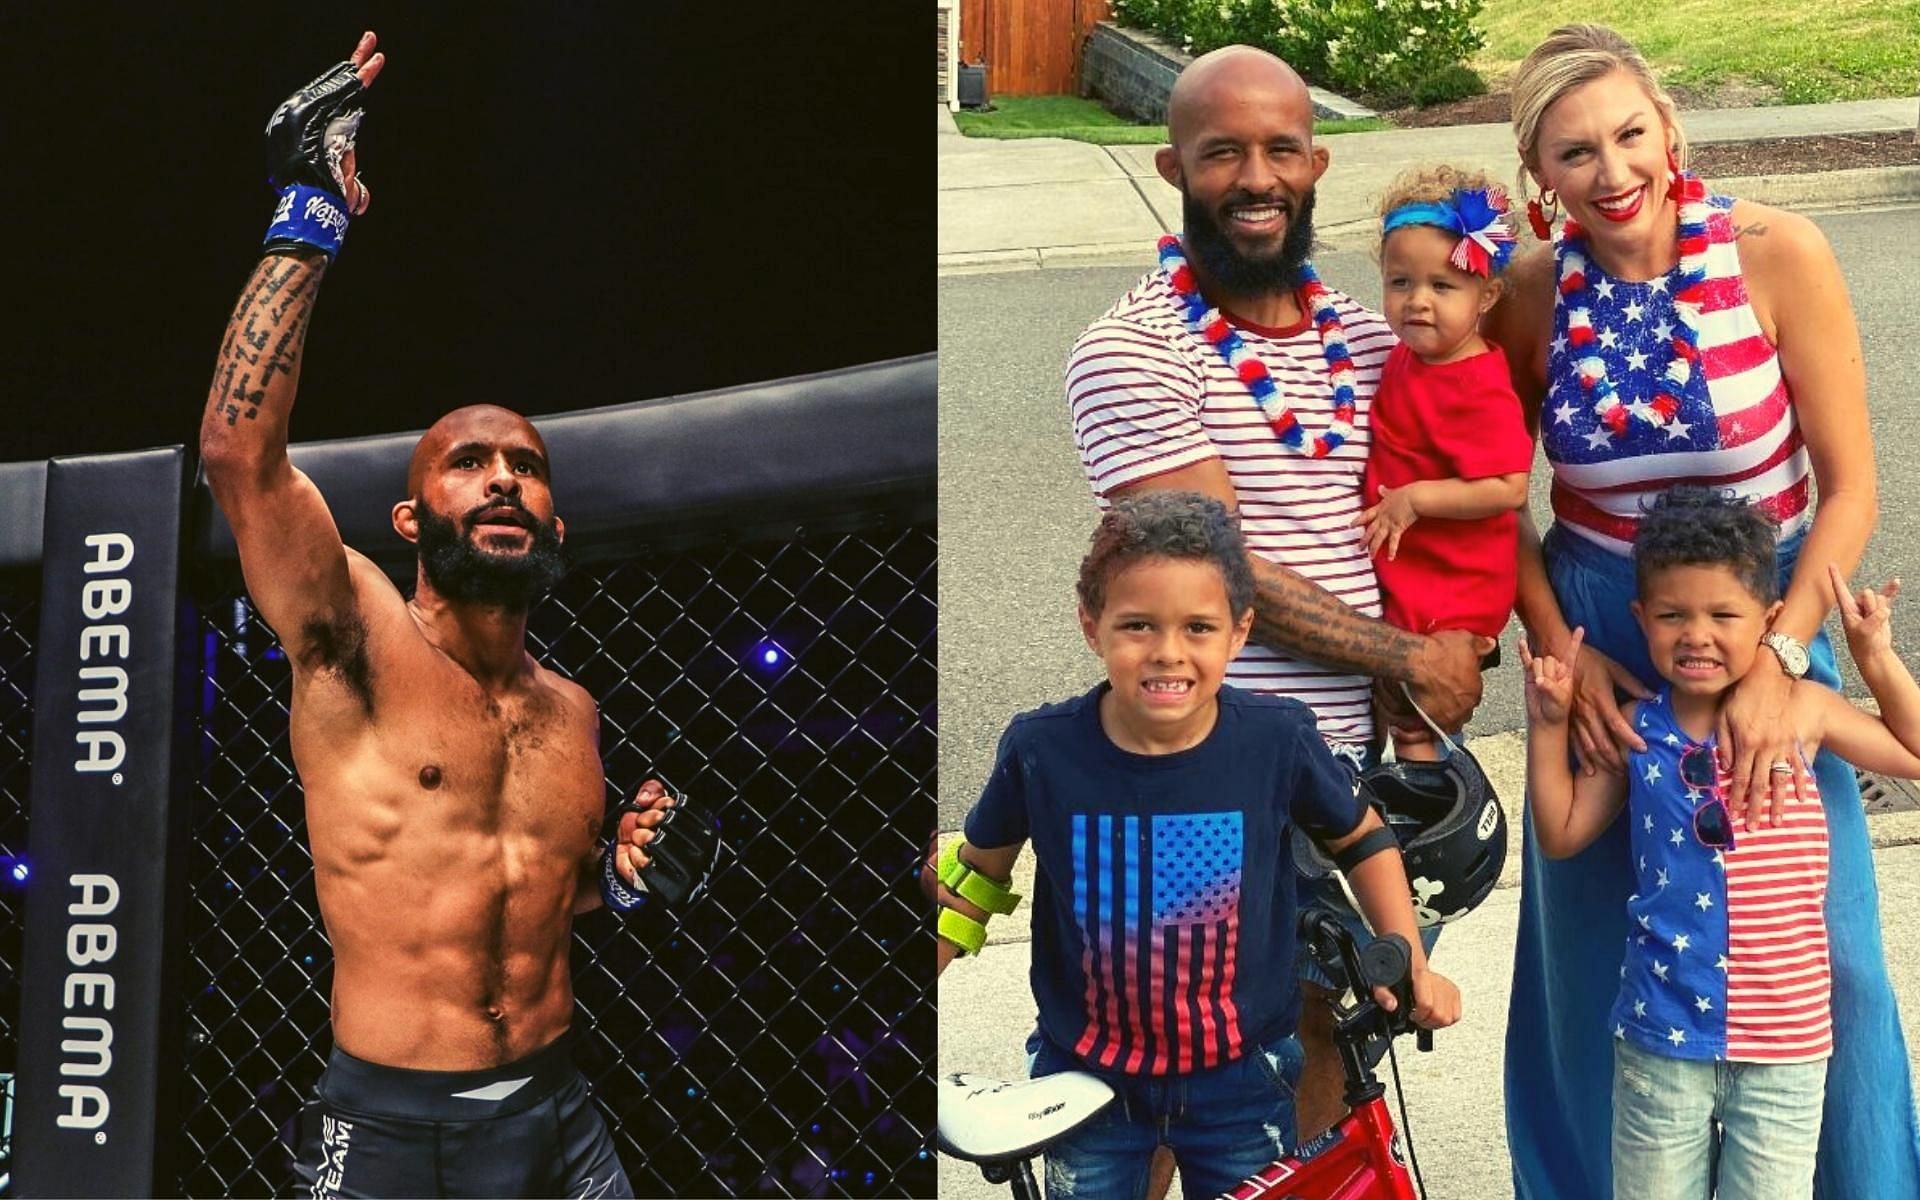 World&#039;s mightiest dad. Demetrious Johnson is one of the best MMA fighters ever and is also an awesome dad of three. (Images courtesy: ONE Championship, @mighty on Instagram)